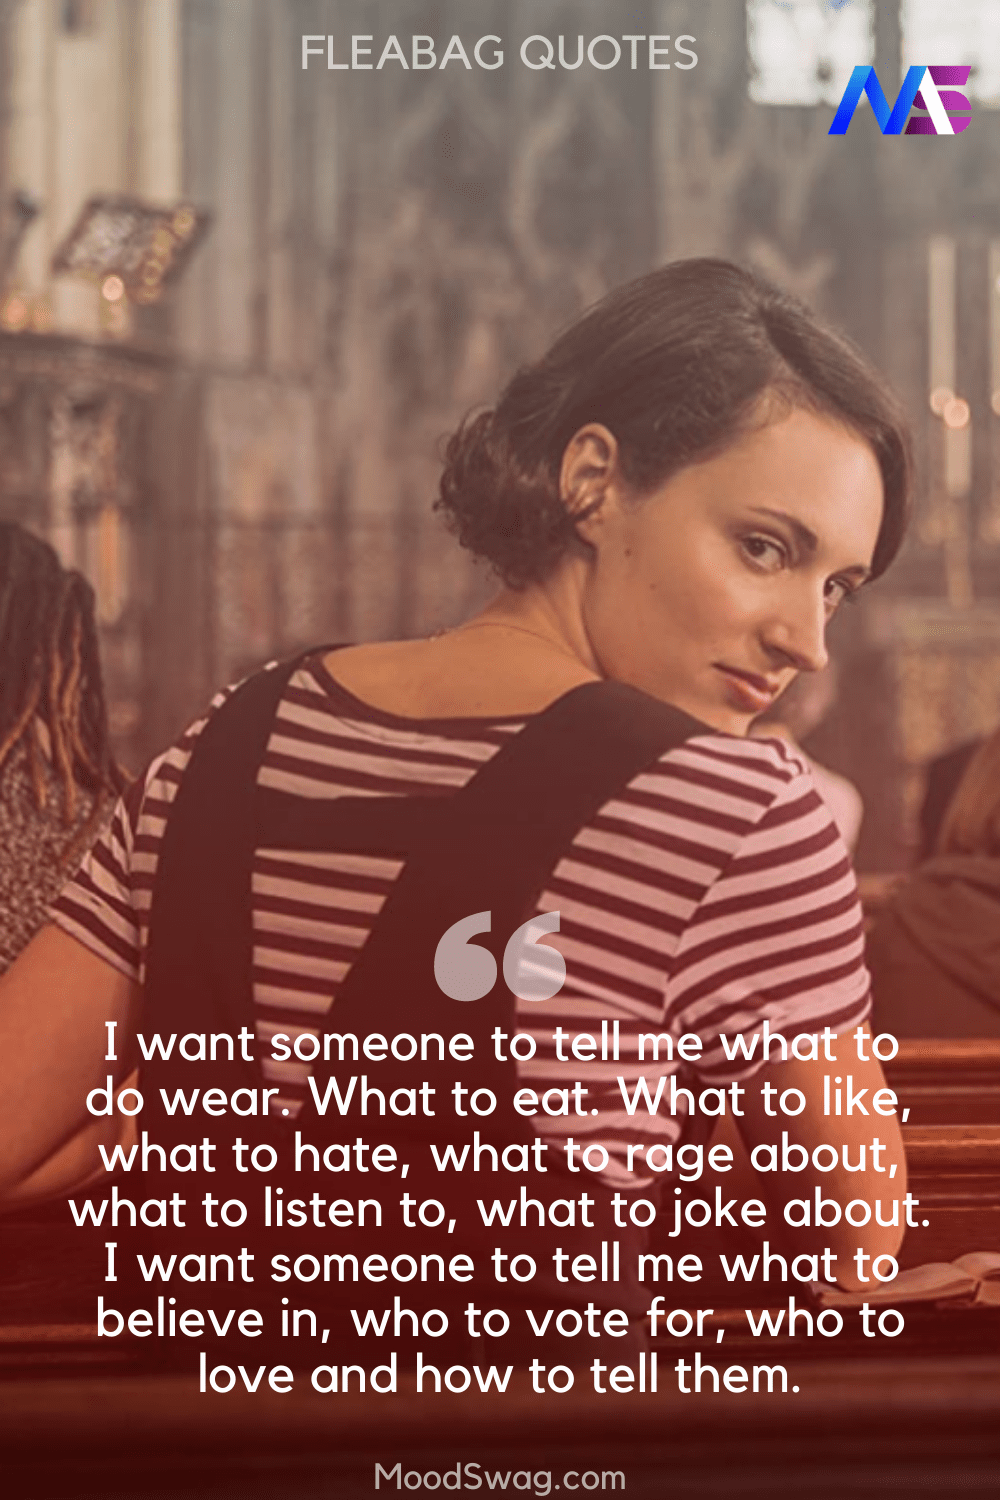 17 Fleabag Quotes That Are Hilarious Edgy And Brilliant Moodswag